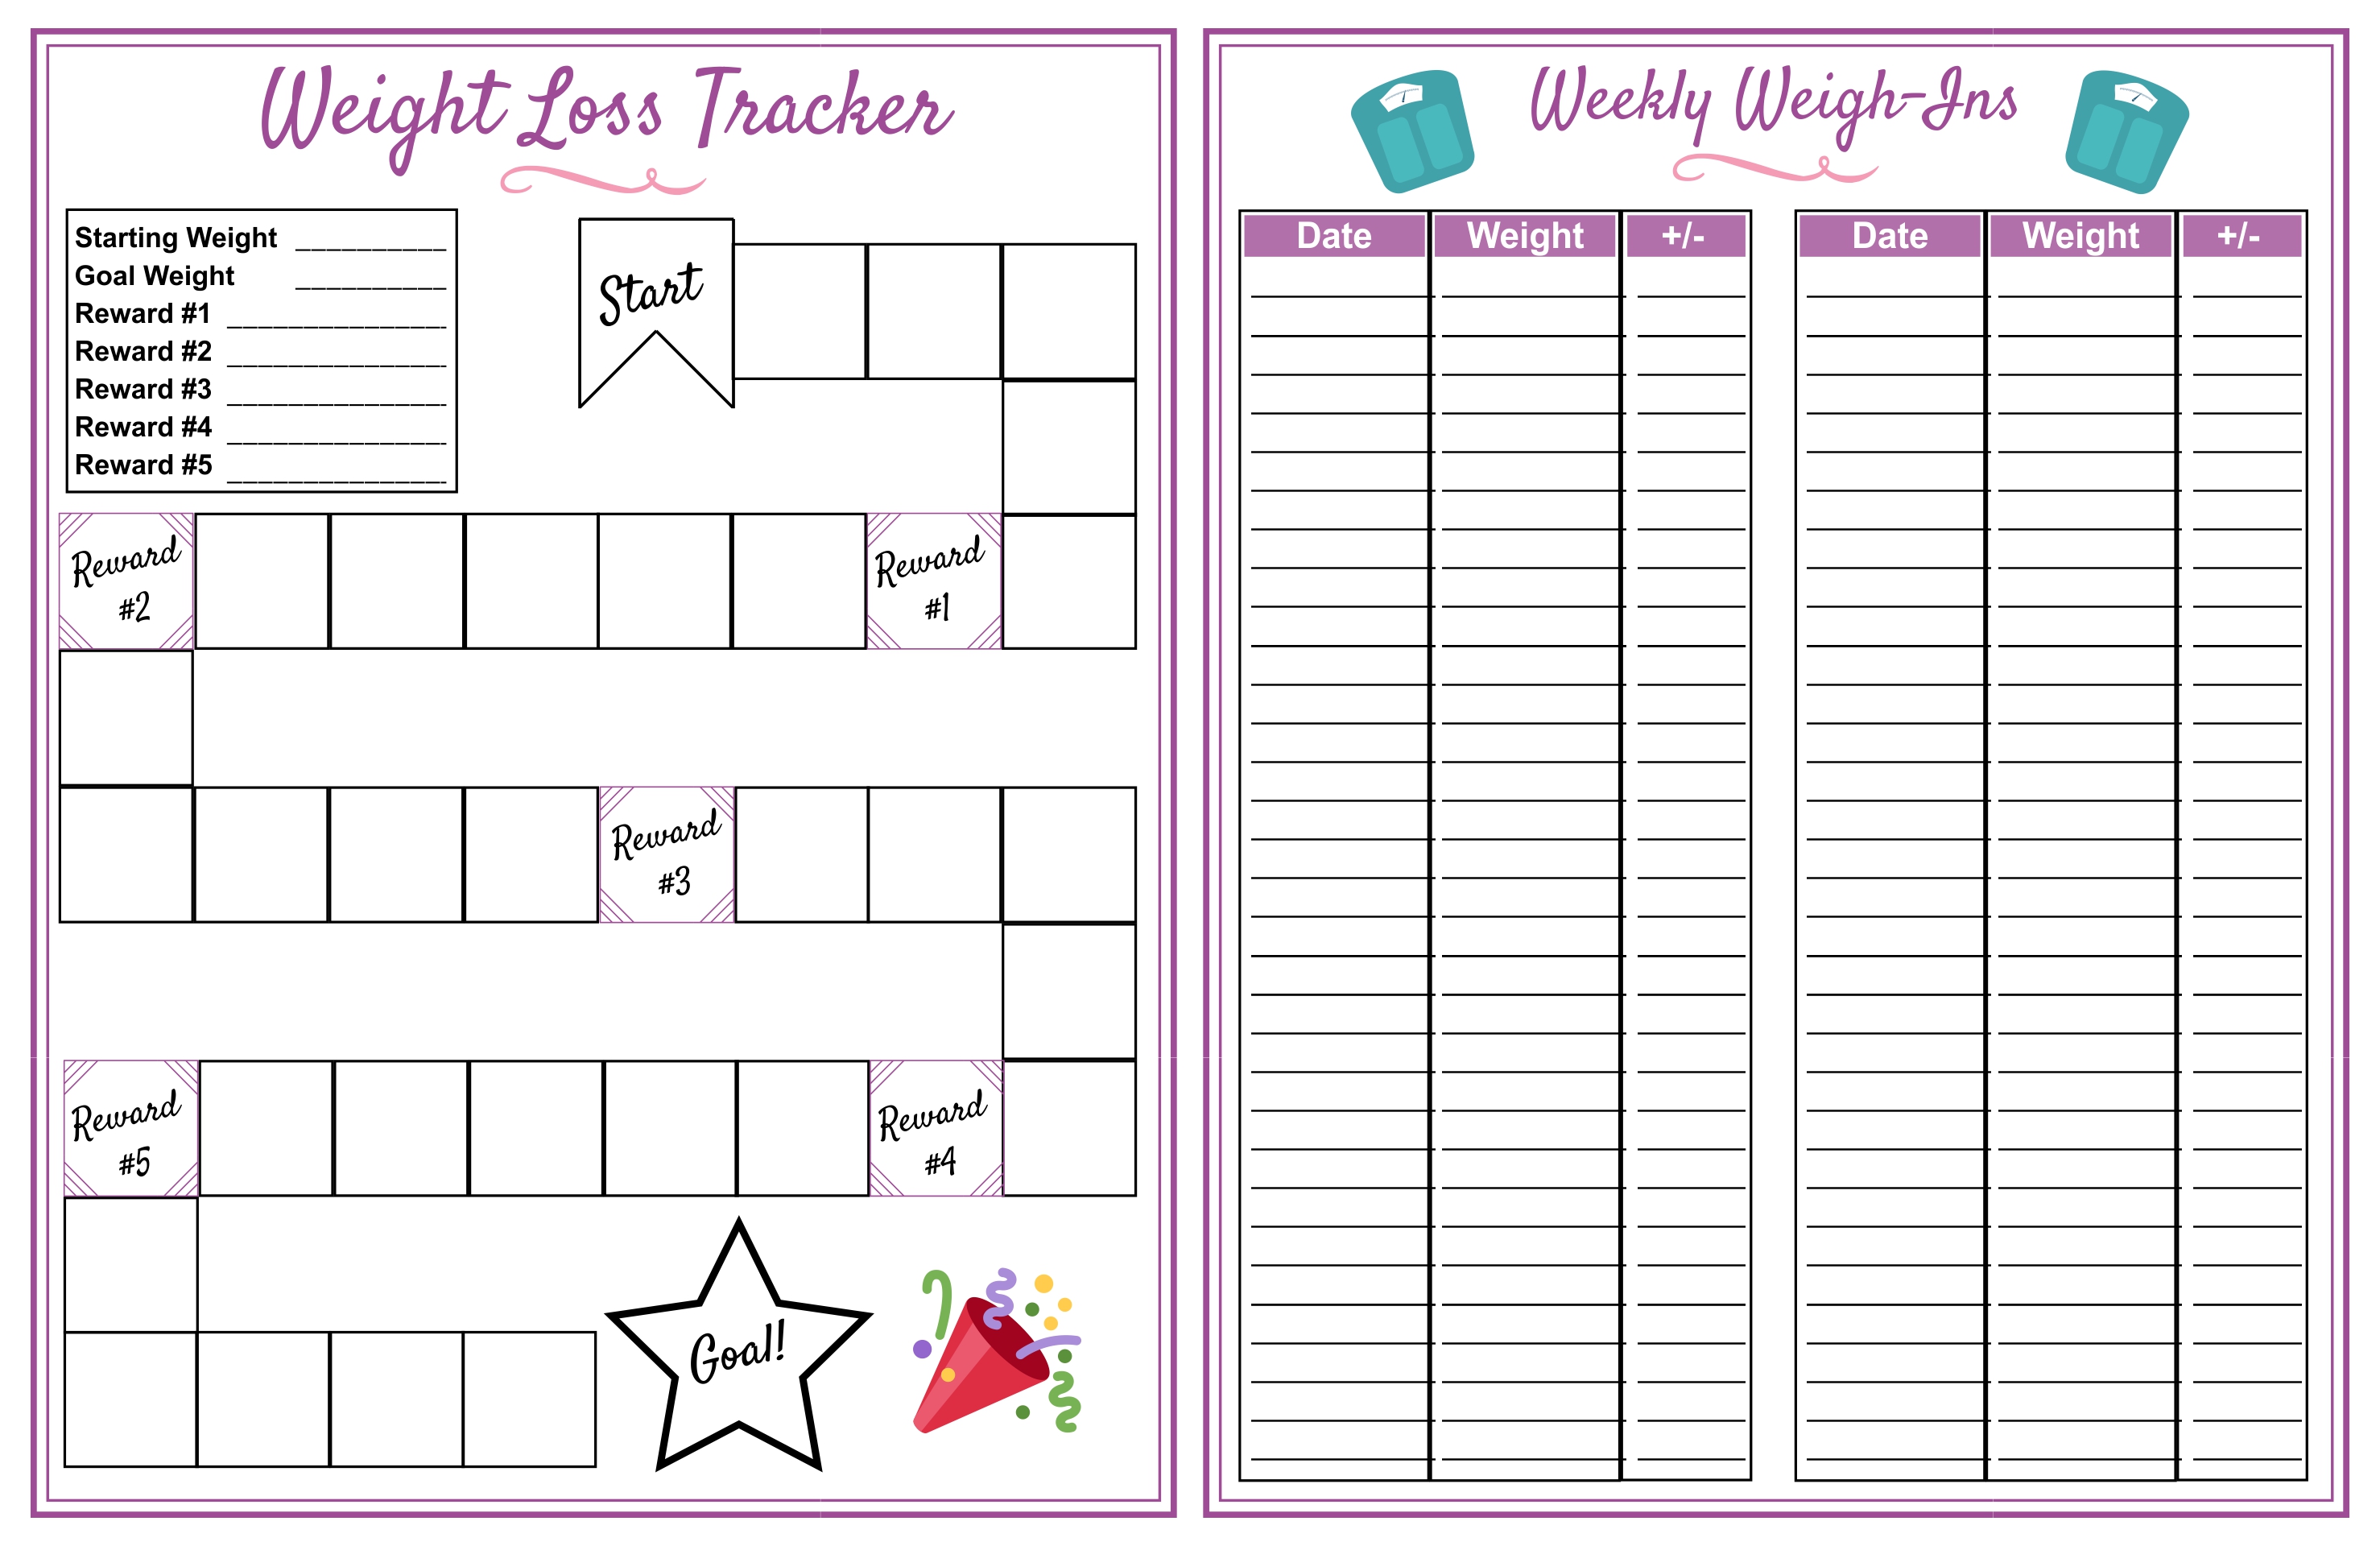 Free Printable Weight Loss Journal Template Printable Templates